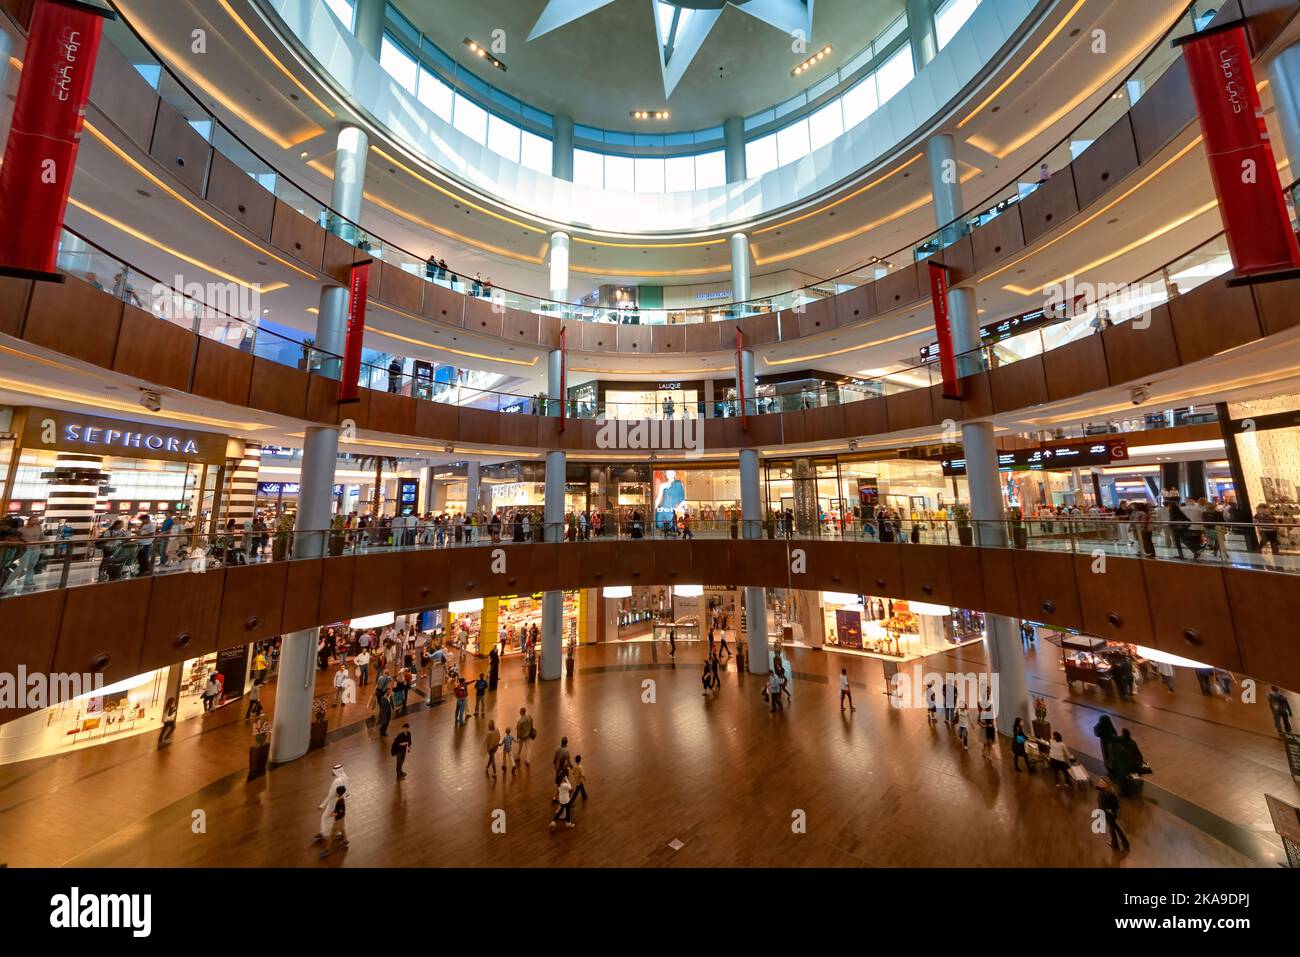 Dubai, UAE - January 06, 2012: View of the Dubai Mall interior with people doing shopping. It is the second largest mall in the world Stock Photo